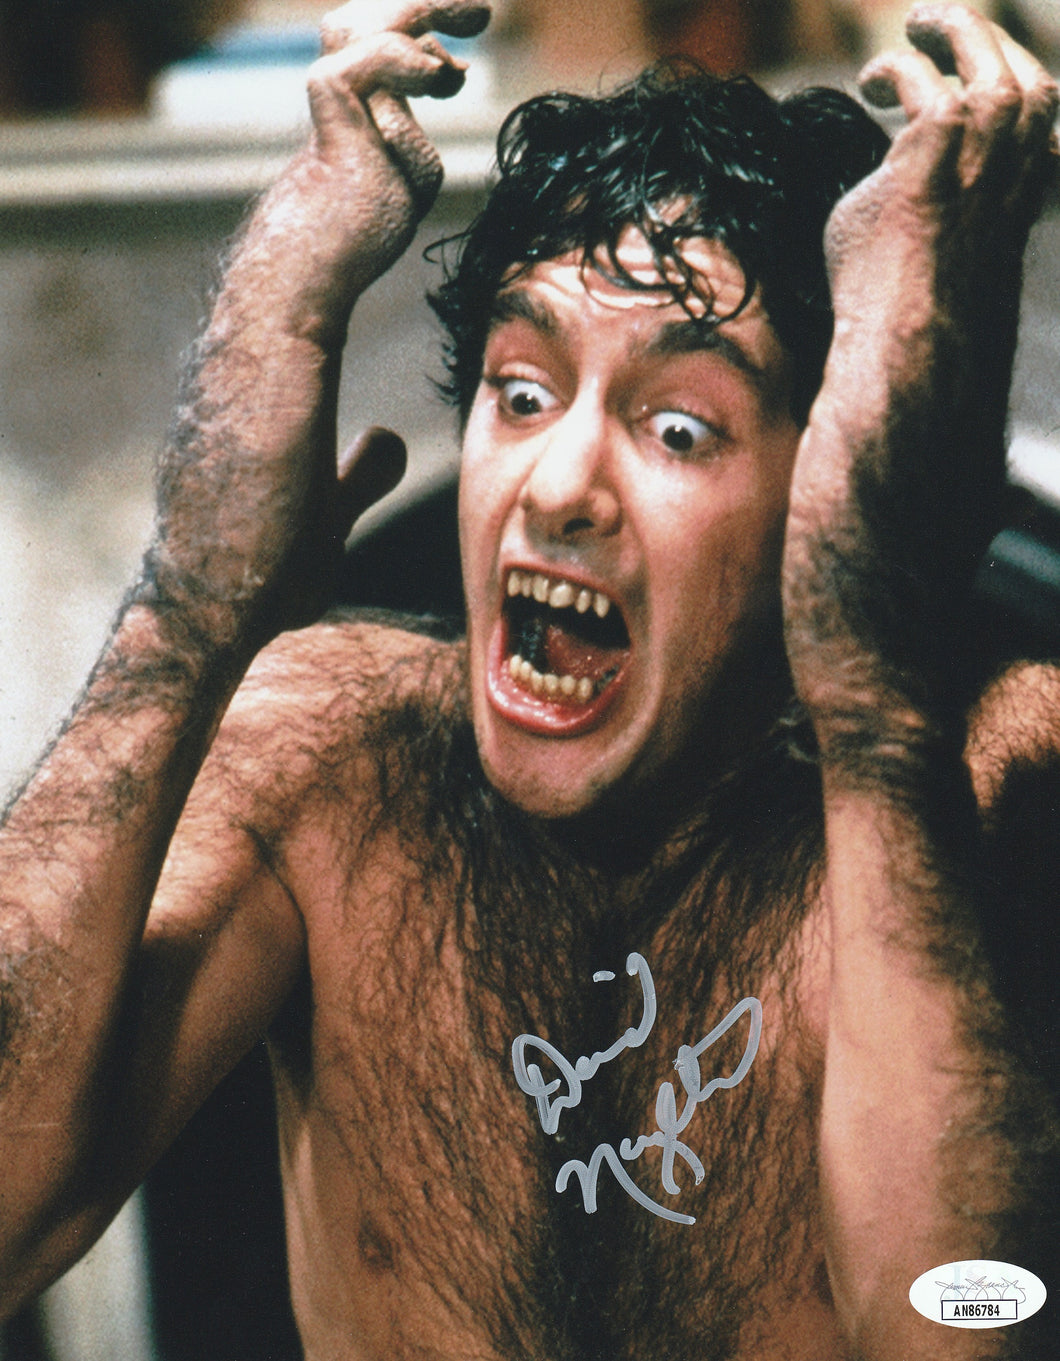 American Werewolf In London David Naughton signed 8x10 photo.  Comes with JSA sticker